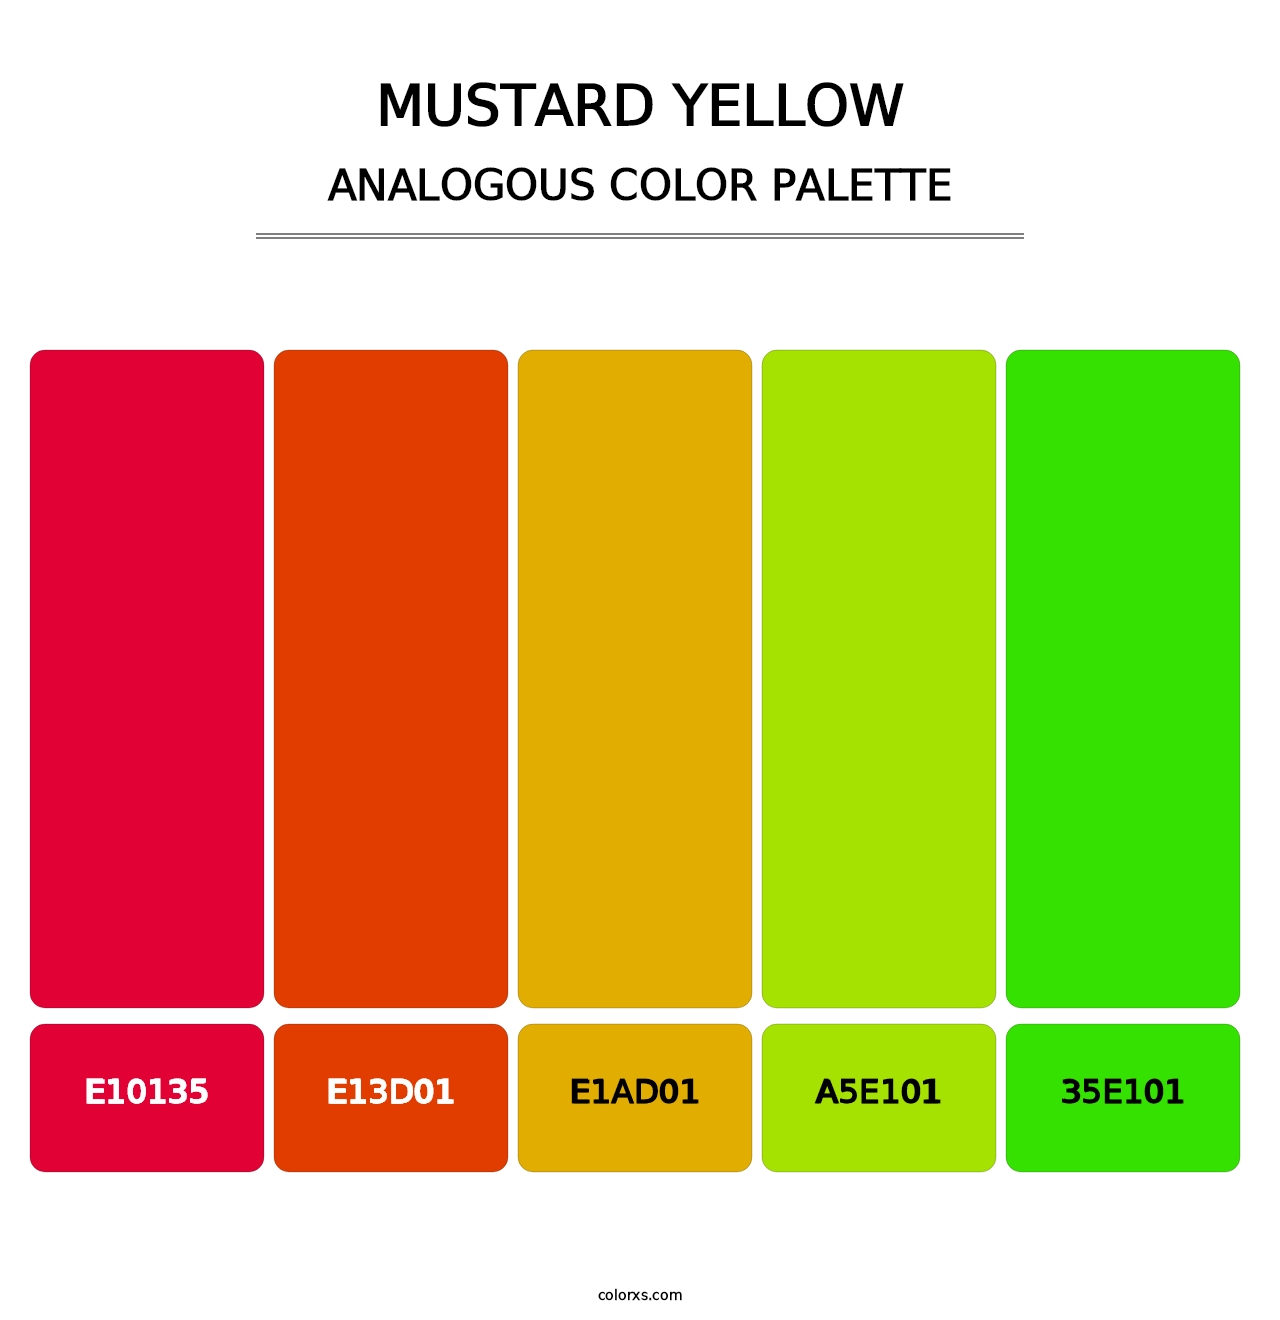 Mustard Yellow - Analogous Color Palette